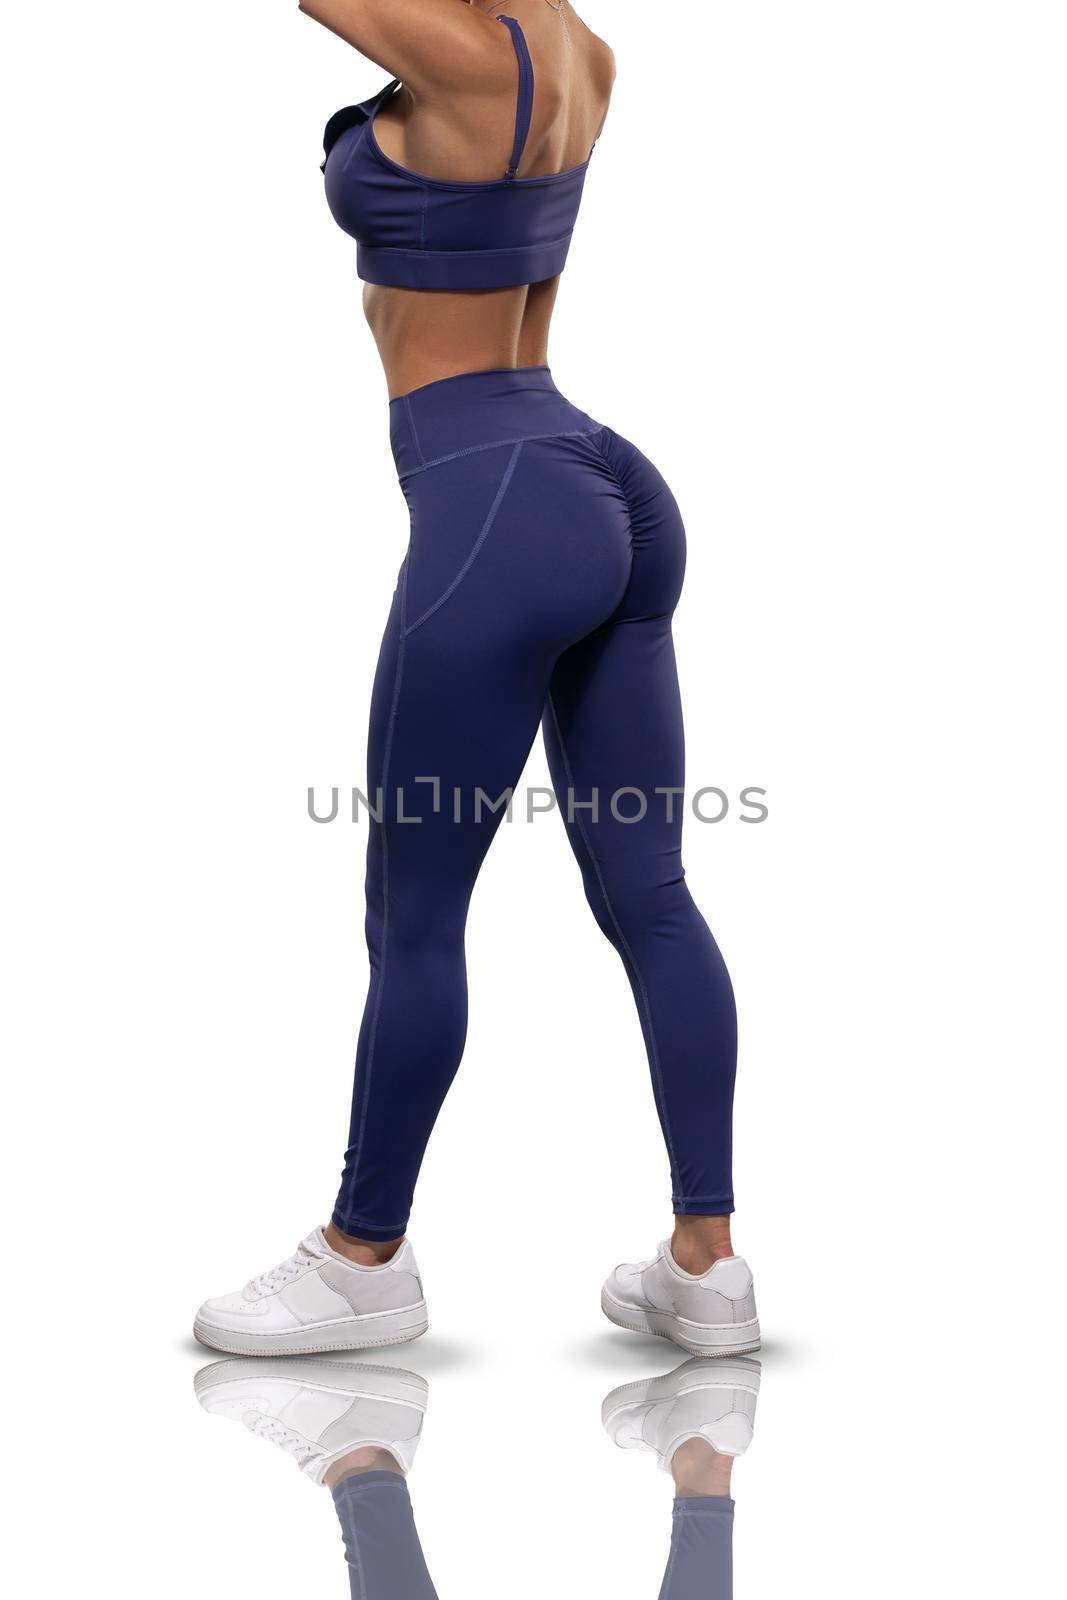 legs girl in blue leggings and top stay back on a white background by but_photo